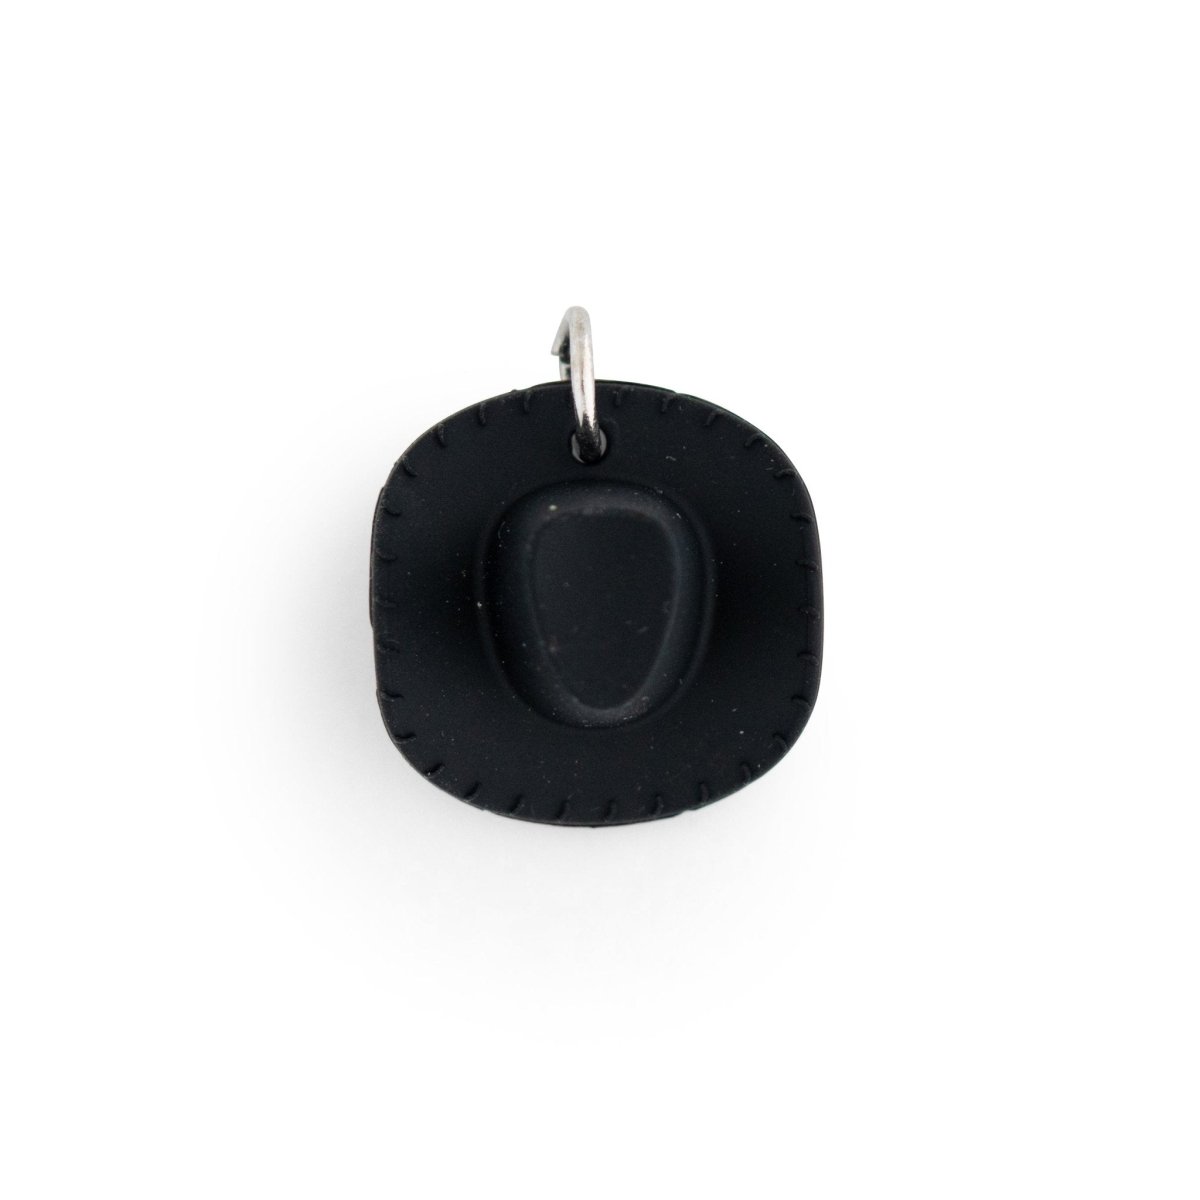 Silicone Charms Cowboy Hats Black from Cara & Co Craft Supply